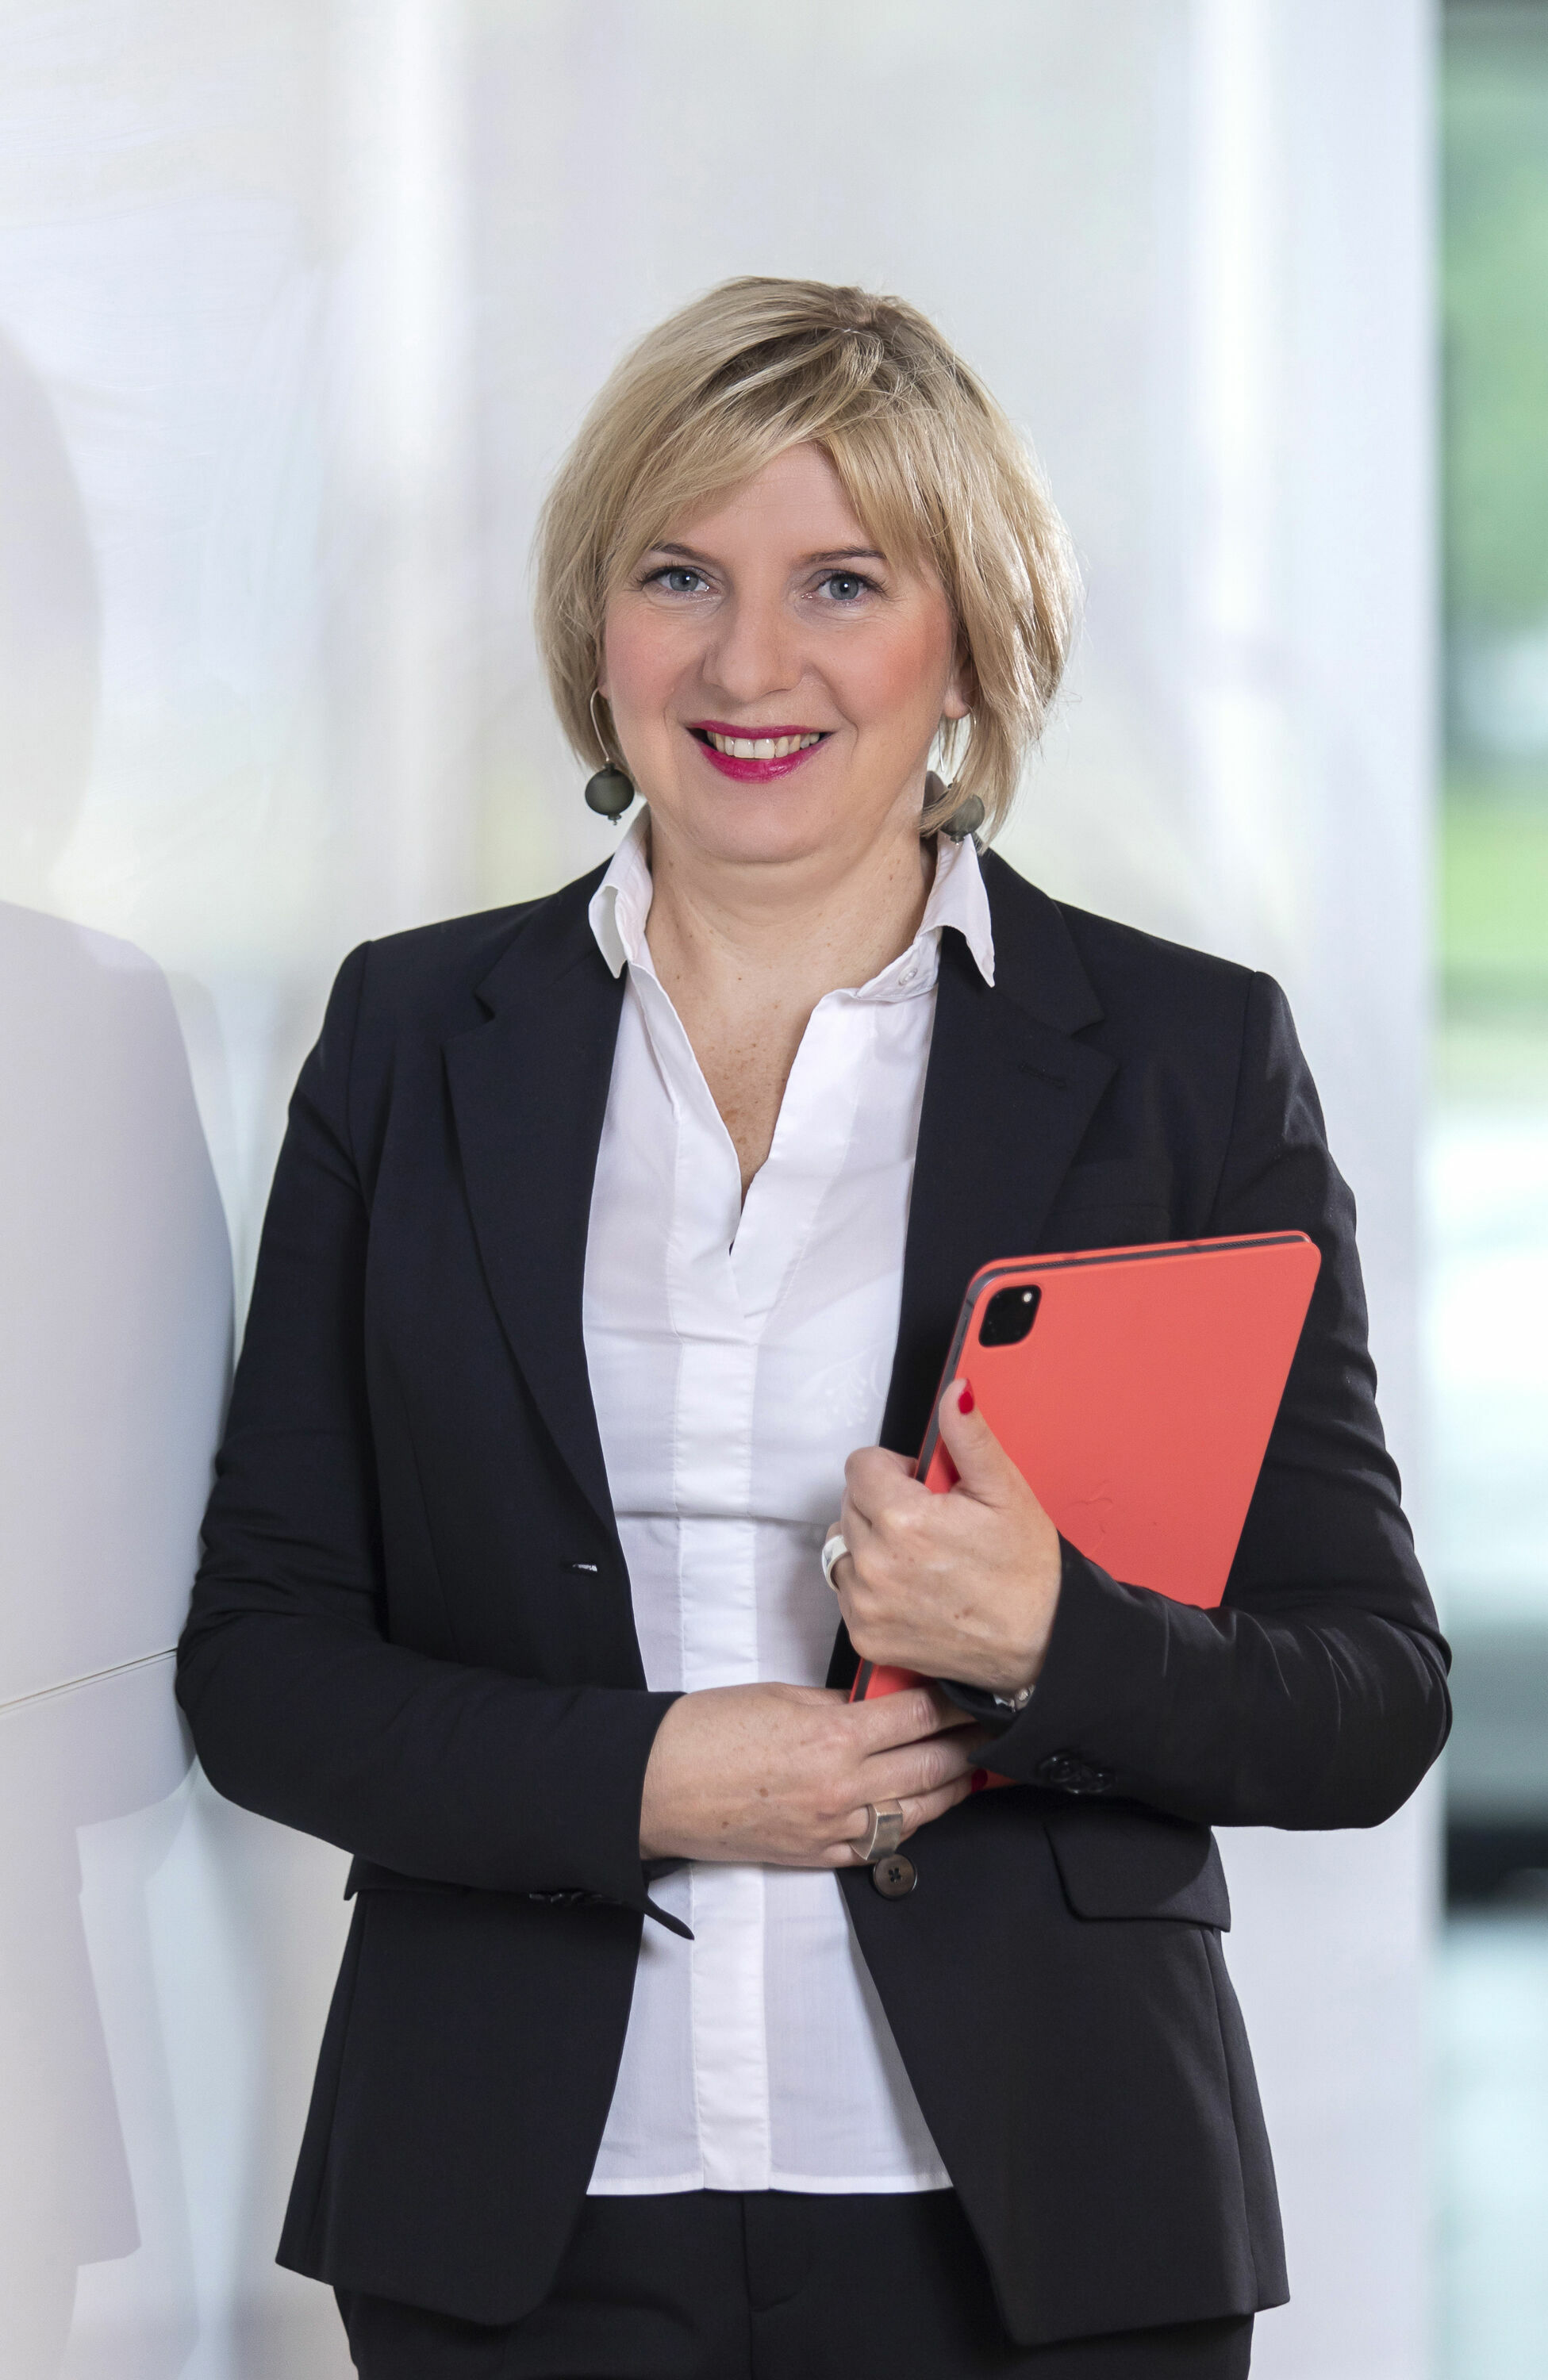 Kinga Németh is a member of the Board of Management at Audi Hungaria responsible for Human Resources and Organisation from 1 June 2021.